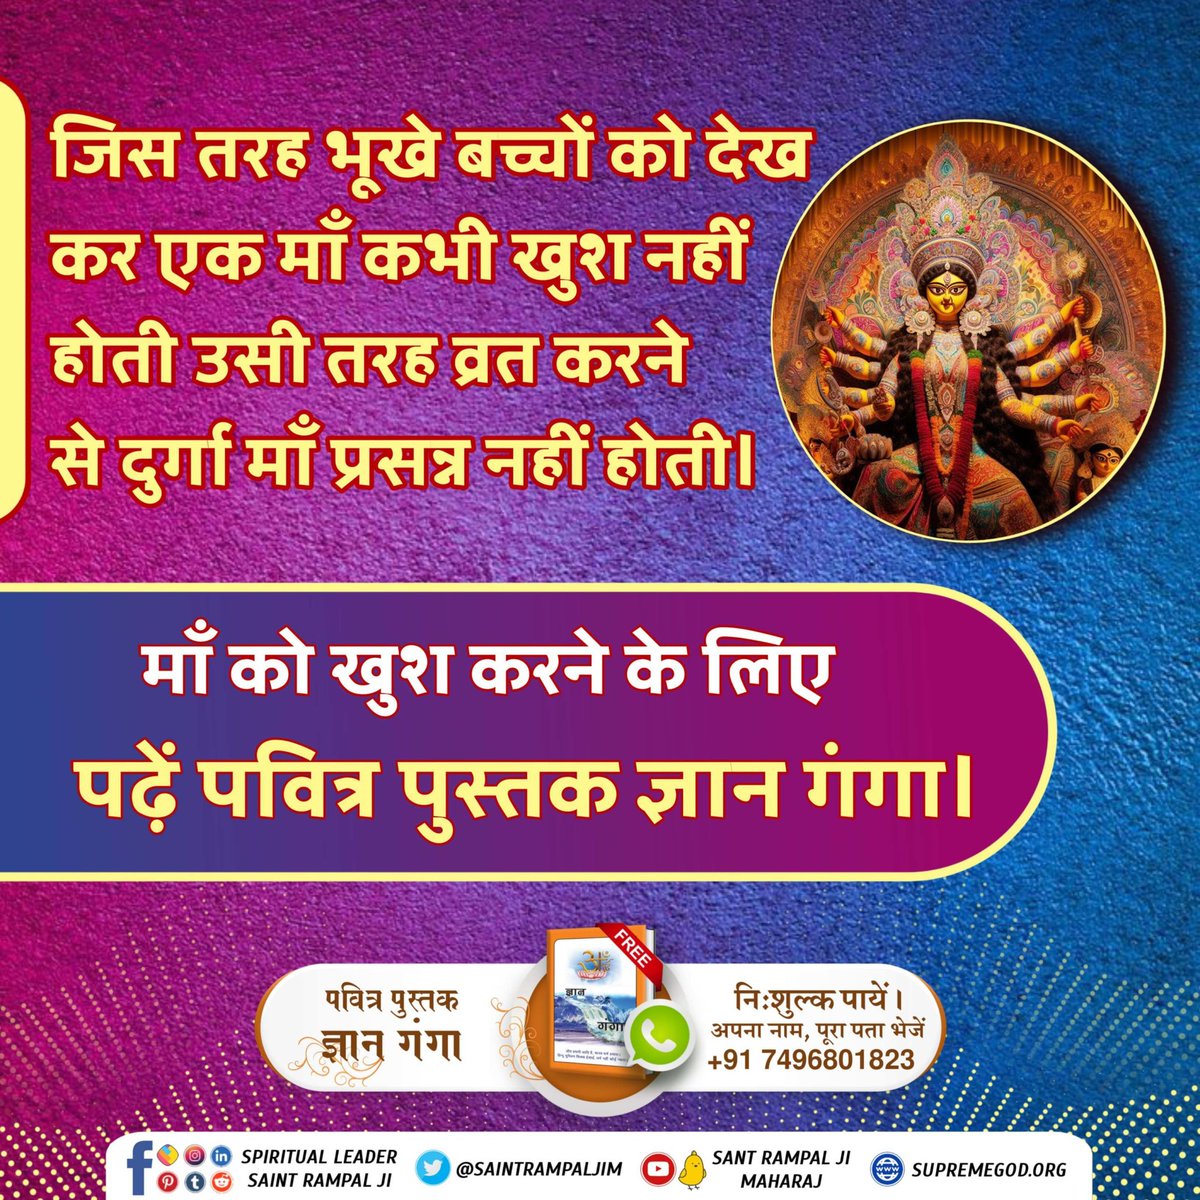 #देवी_मां_को_ऐसे_करें_प्रसन्न

To please Maa Durga, every devotee of the Goddess keeps fasts during Navratri. But can the Goddess ever be happy seeing hungry children? There is proof in Gita Chapter 6 Verse 16 that fasts should not be observed.